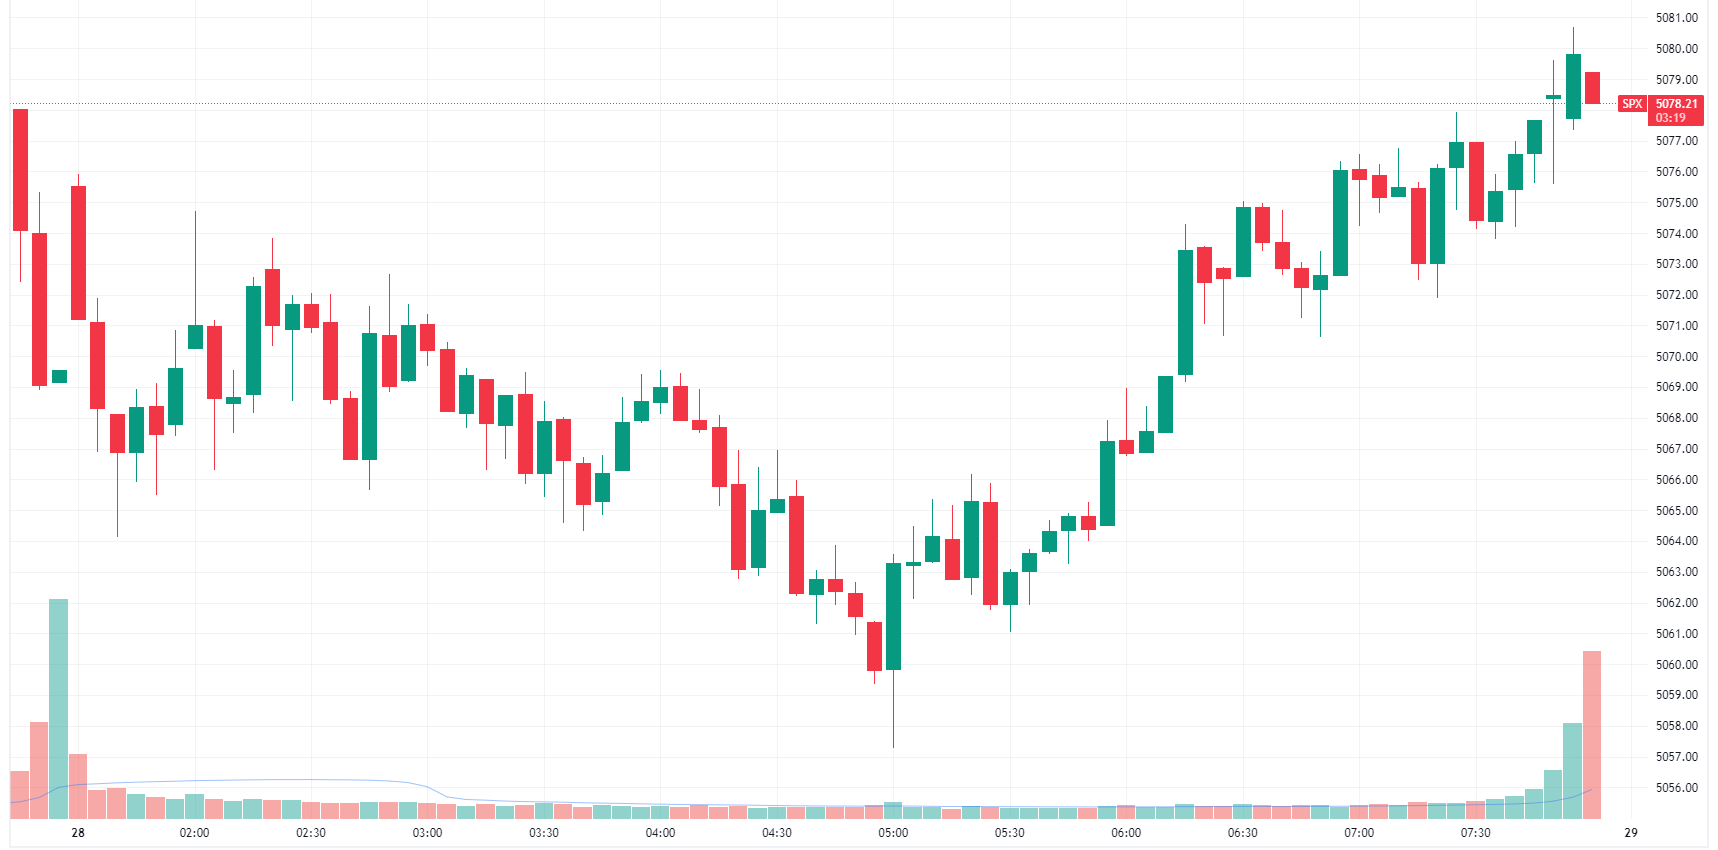 S&P 500 recovers in the last two hours of trade to close slightly higher (Source: TradingView)